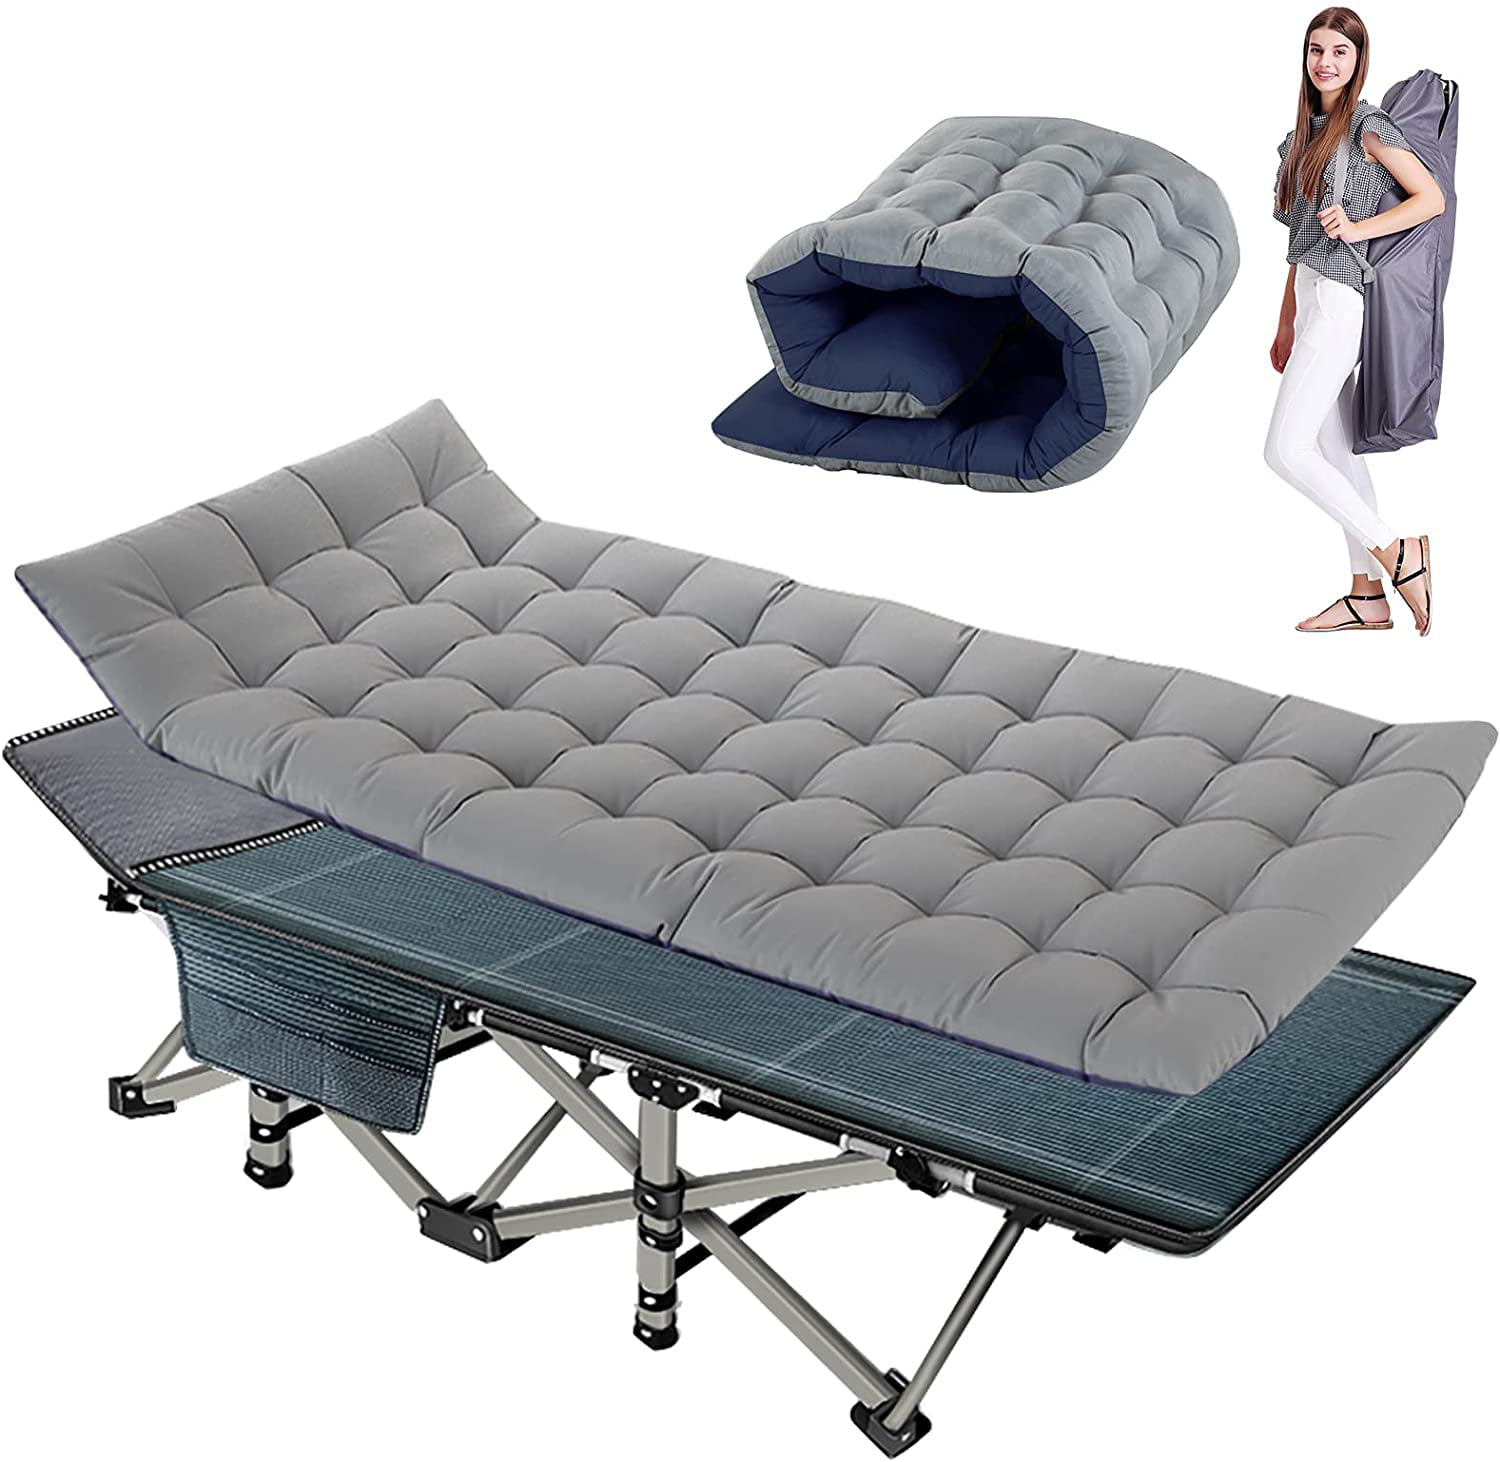 COLEMAN QUEEN SIZE FOLDING CAMPING COT Elevated Camp Bed Airbed Air Mattress NEW 